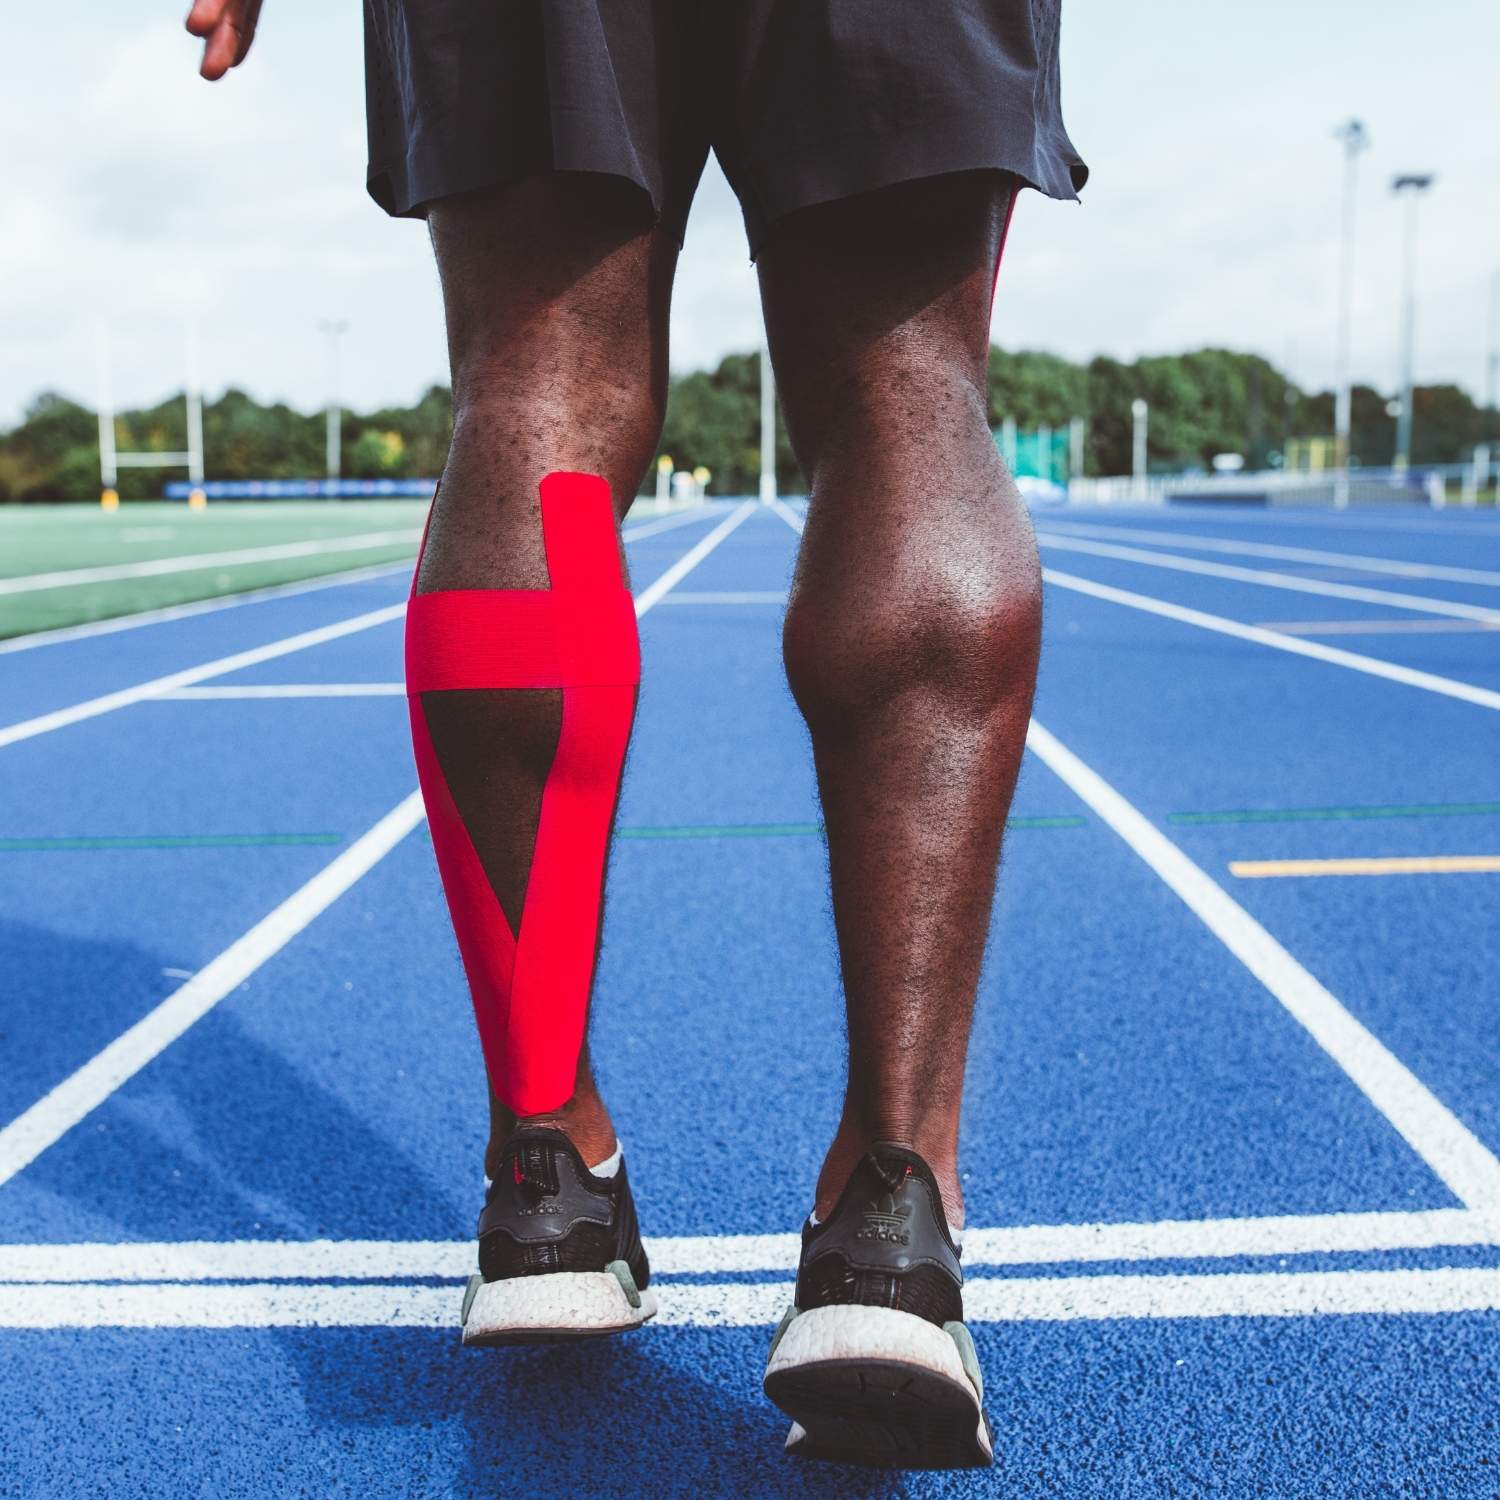 K Tape Myths That Are Just Plain Wrong - SPORTTAPE